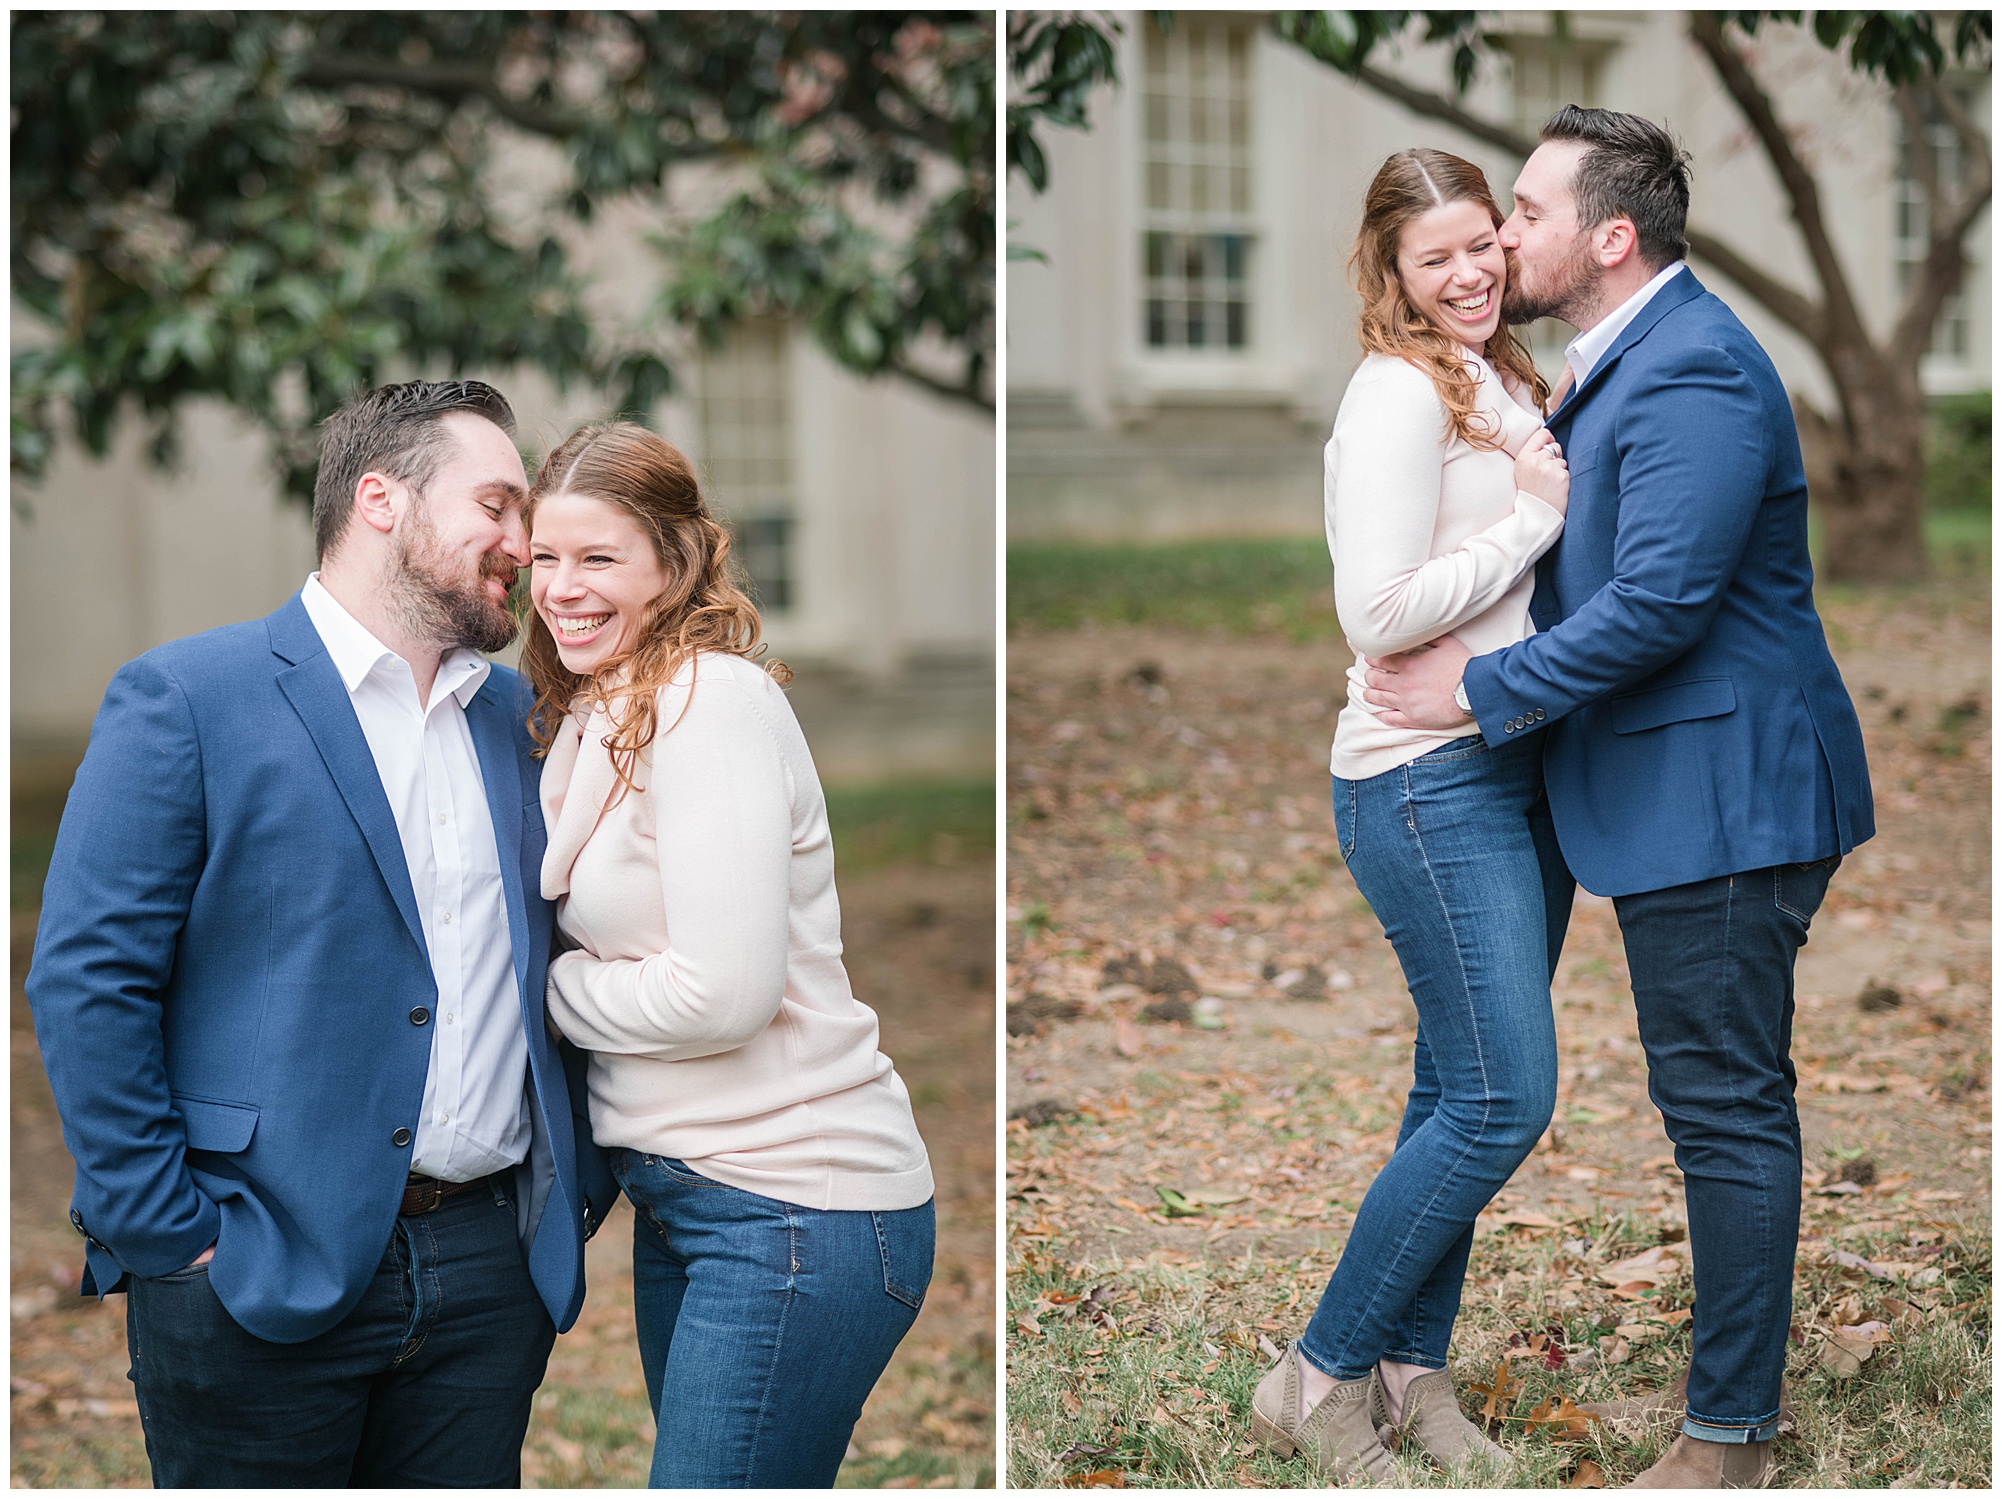 Virginia museum of fine arts engagement photos in richmond. in the fall. in november. by rva wedding photographer, sarah & dave photography.